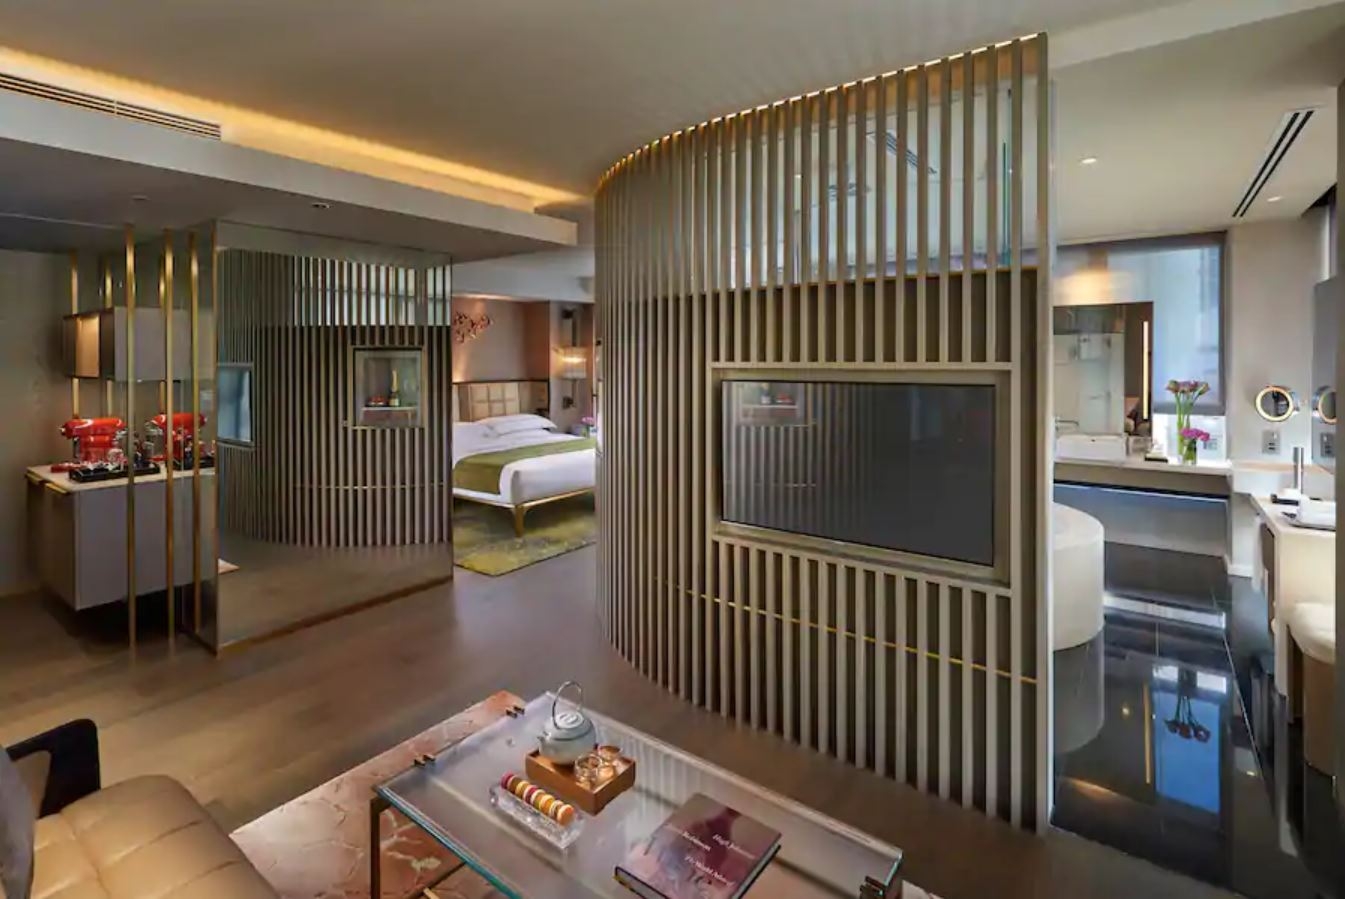 Photo: Since December 2020, The Landmark Mandarin Oriental Hong Kong has offered luxurious accommodation to inbound travellers during the 21-day compulsory quarantine. Source: Mandarin Oriental